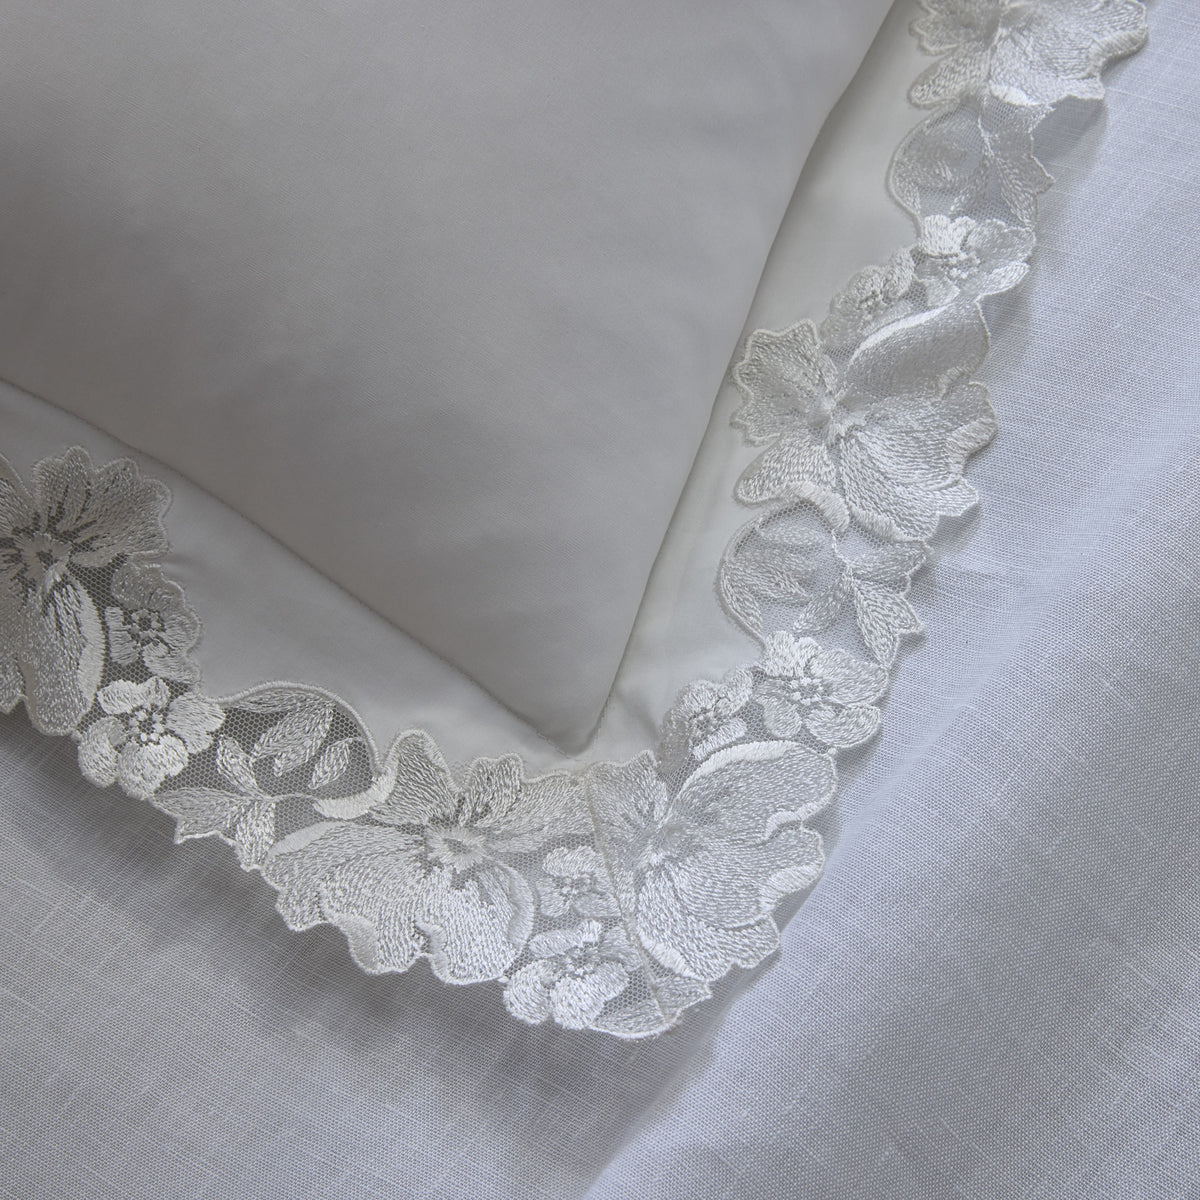 Detailed View of a Sham of Matouk Virginia Bedding in Color White